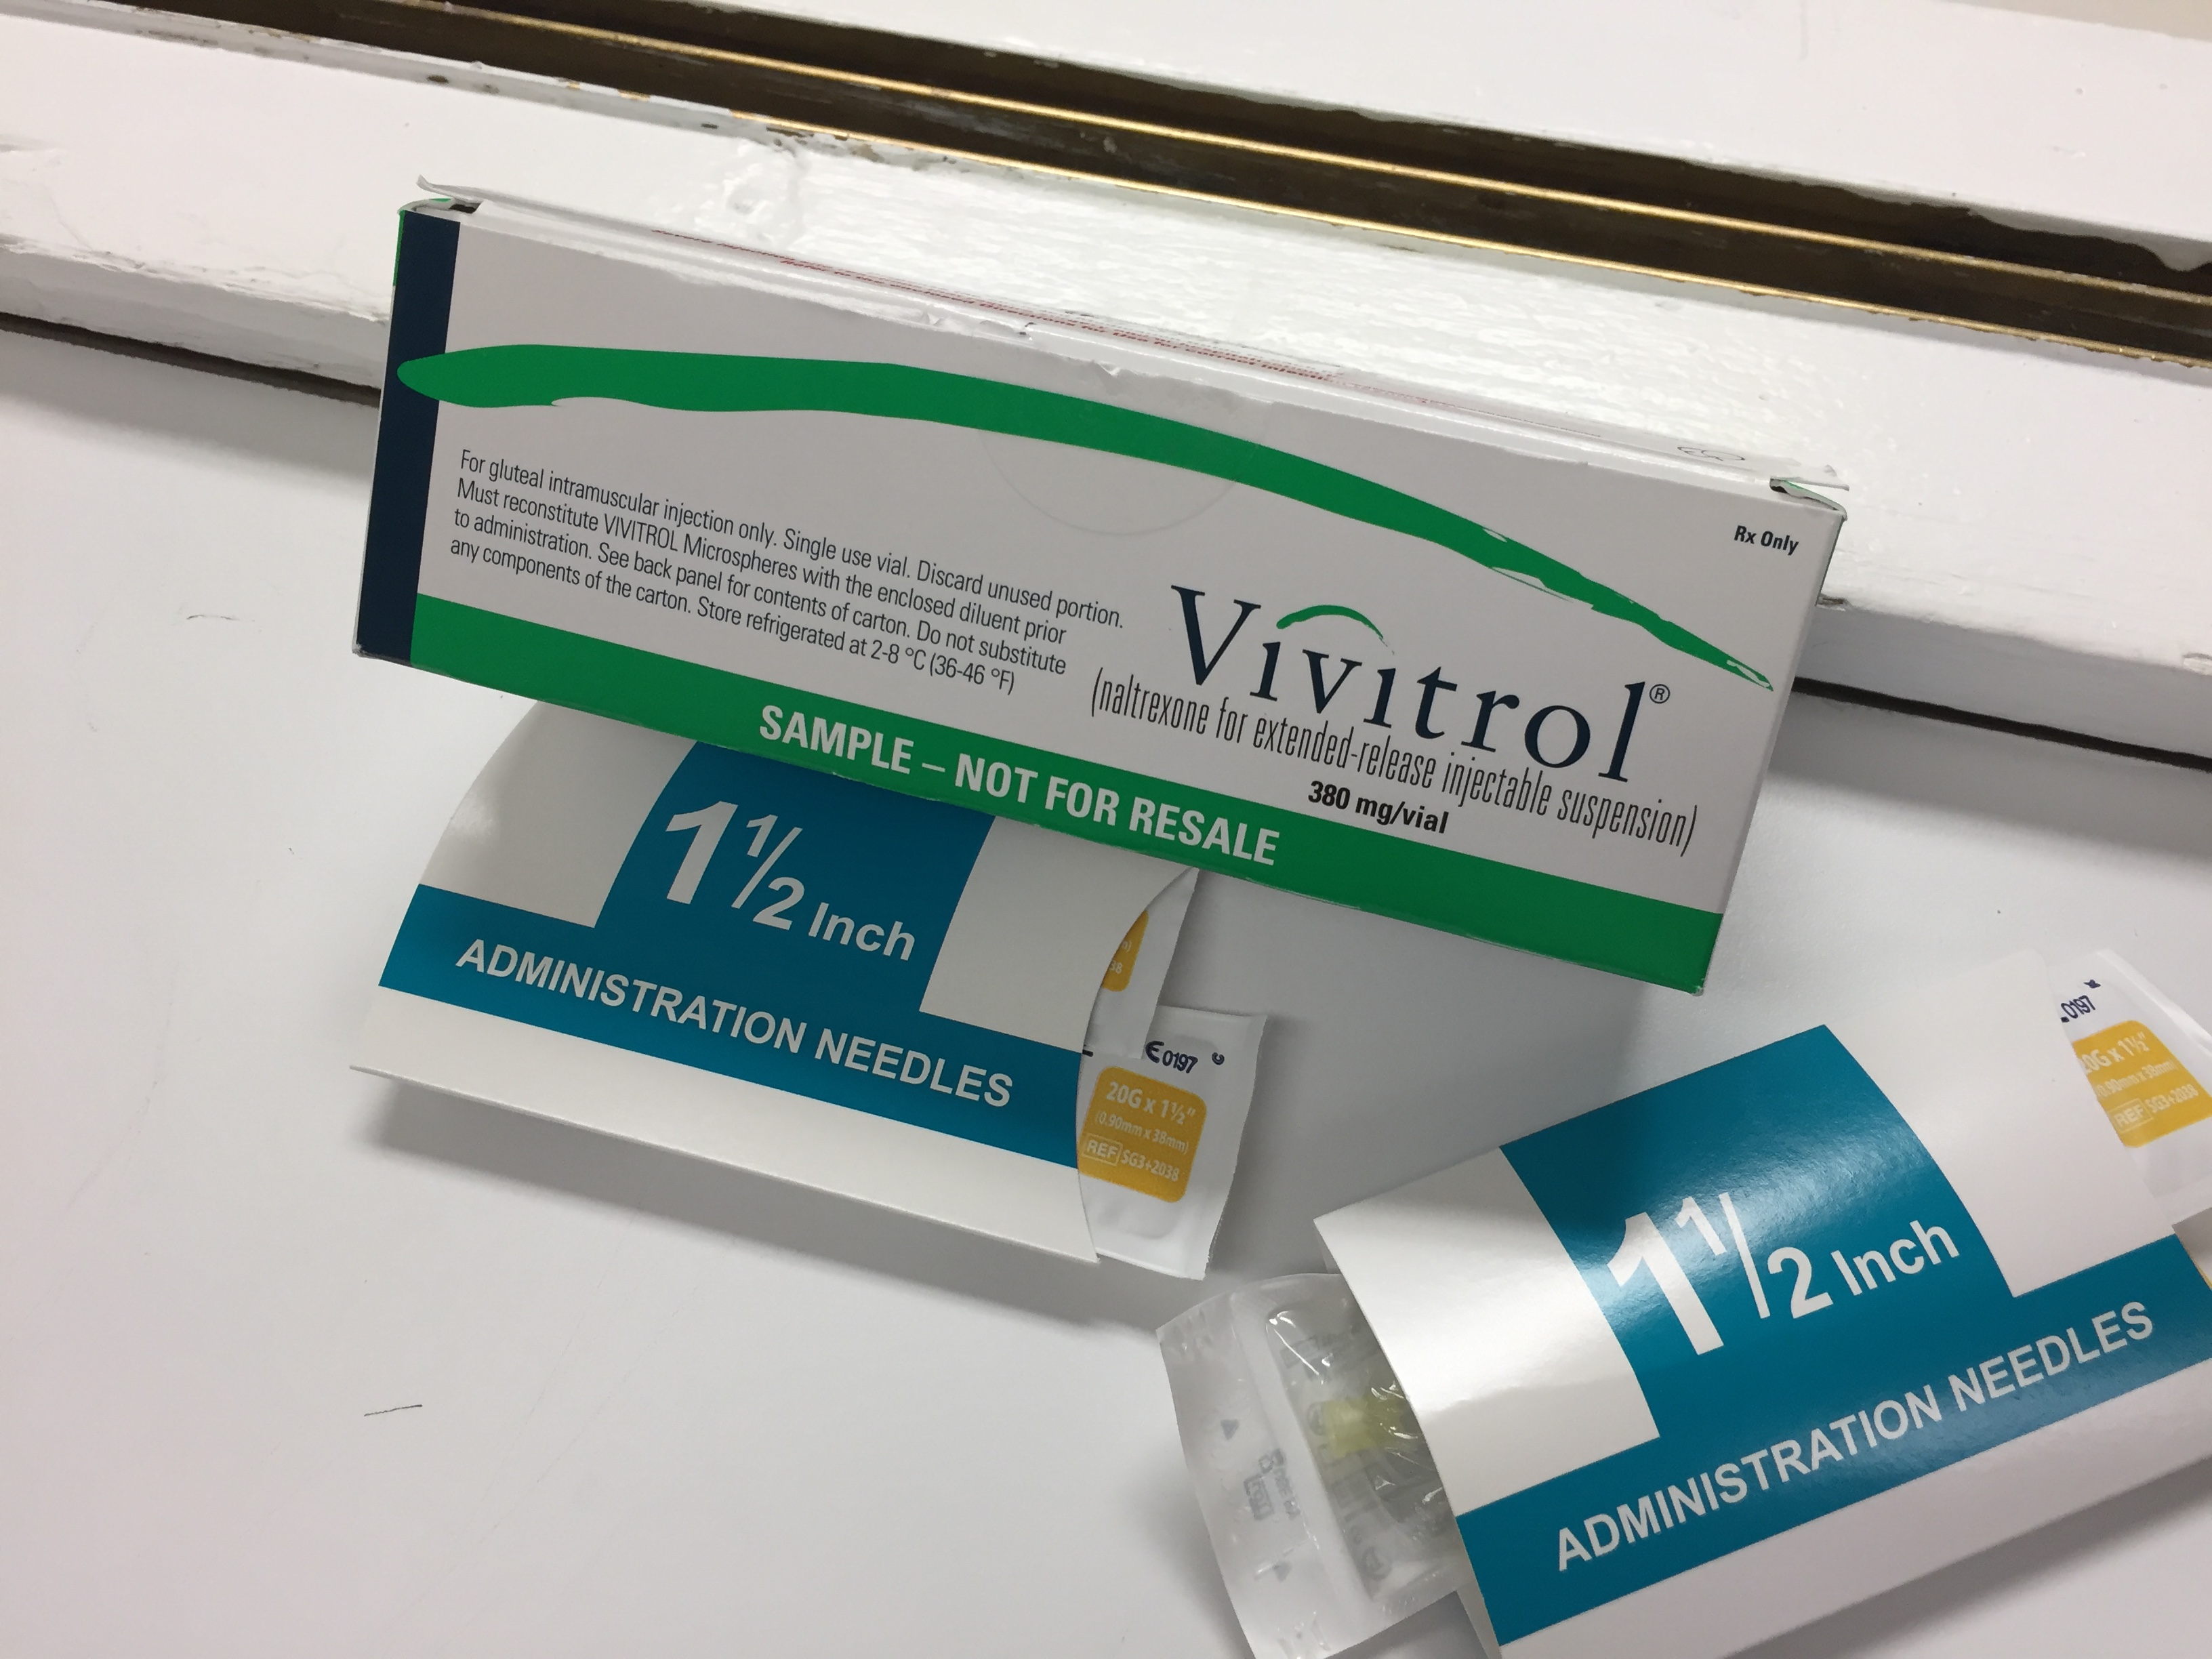 Vivitrol is the injectable form of naltrexone, which cuts cravings for opioids and alcohol. (Photo by Anne Hillman/Alaska Public Media)